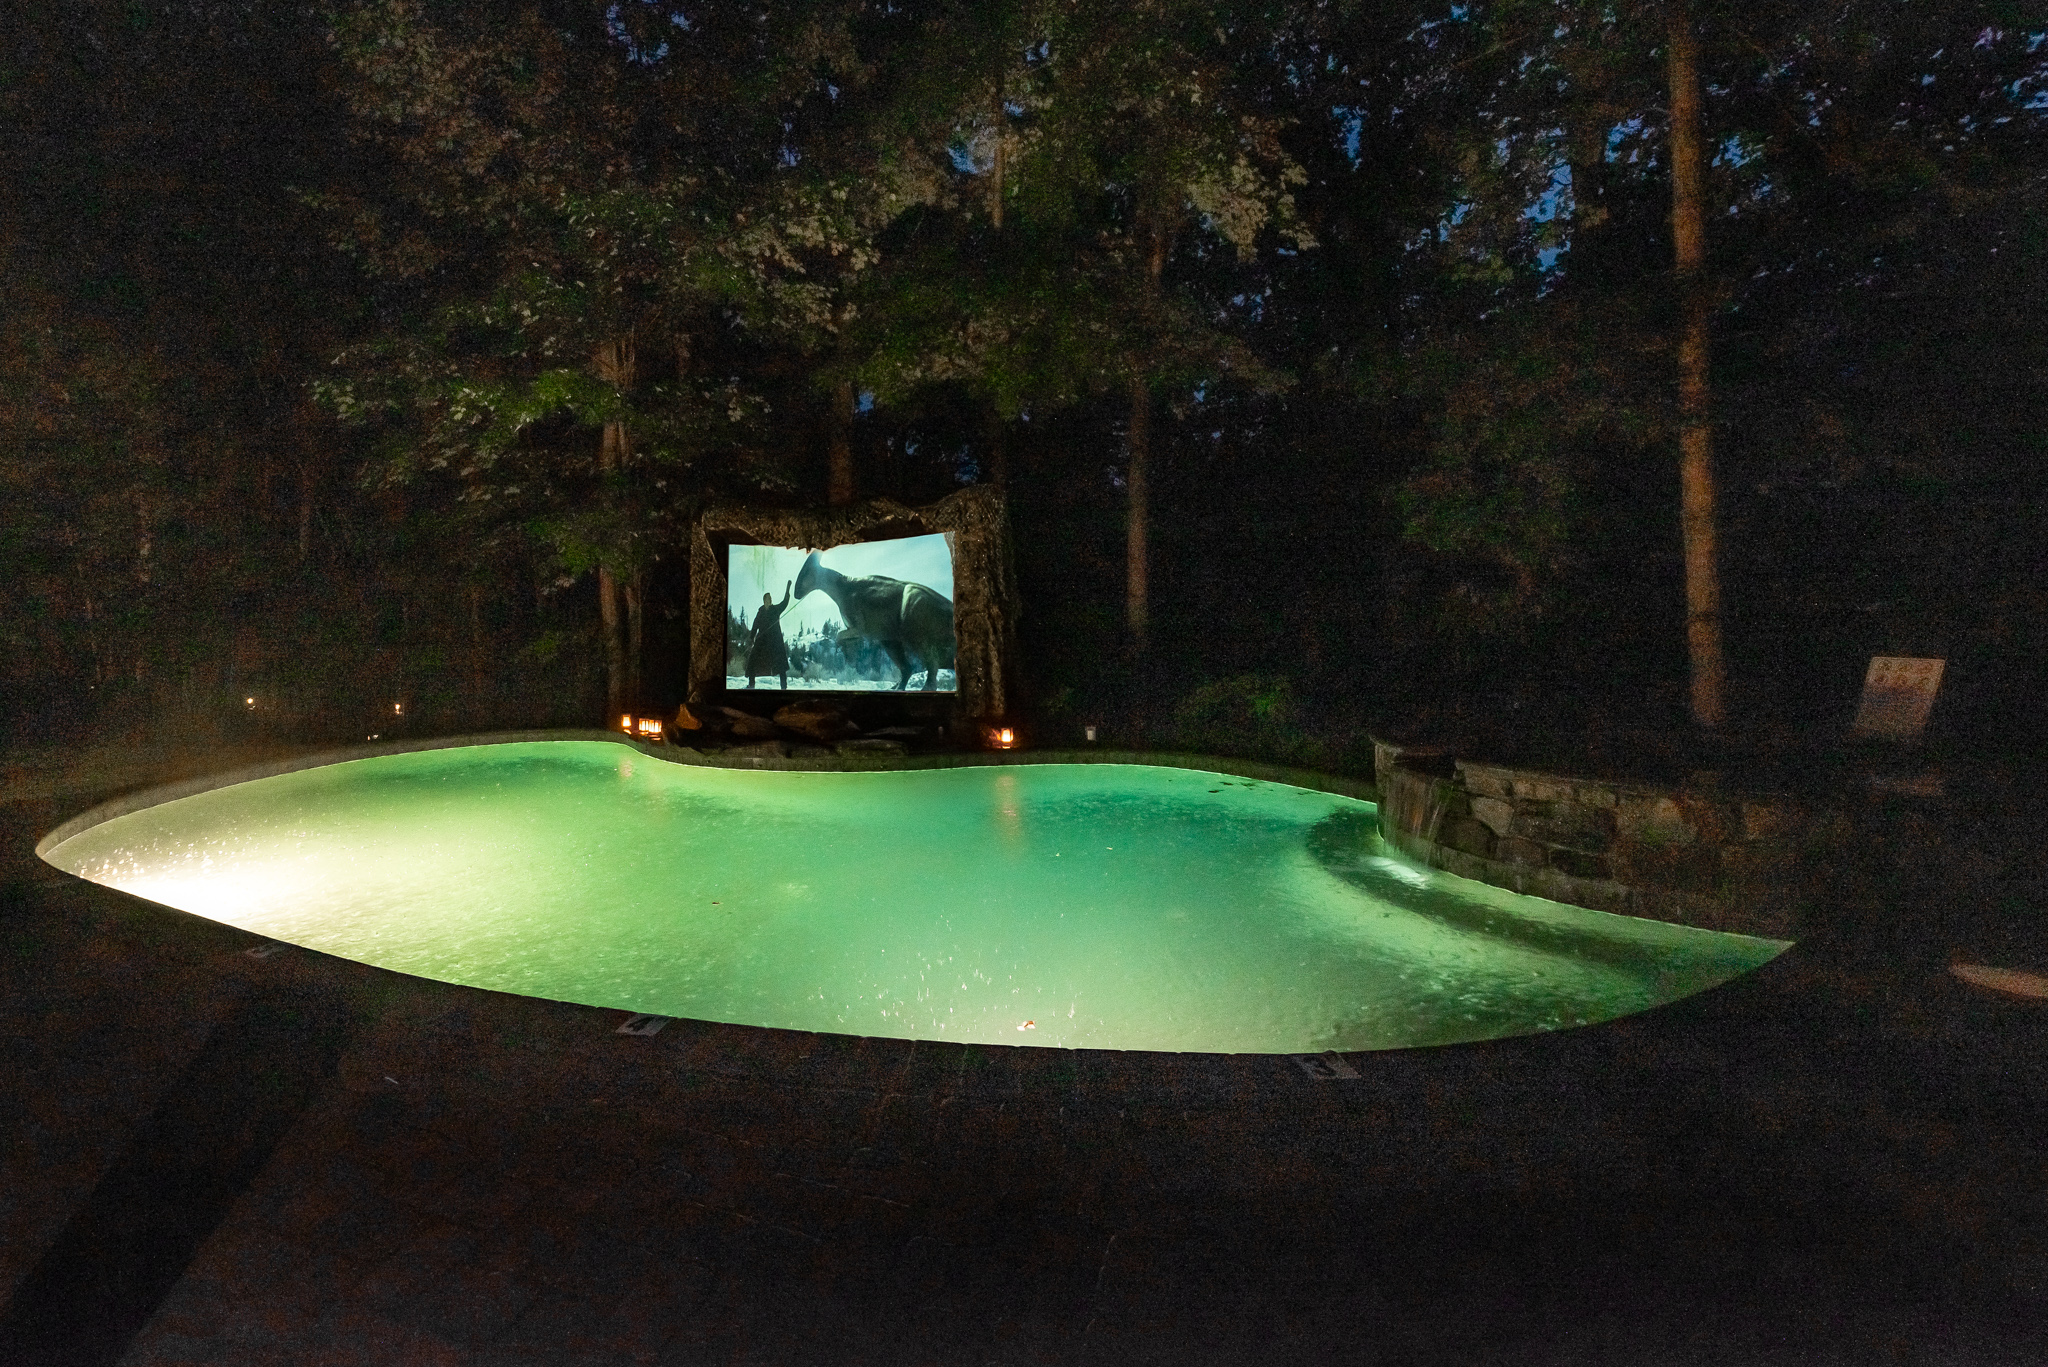 Enjoy the movie projection system by the outdoor pool!